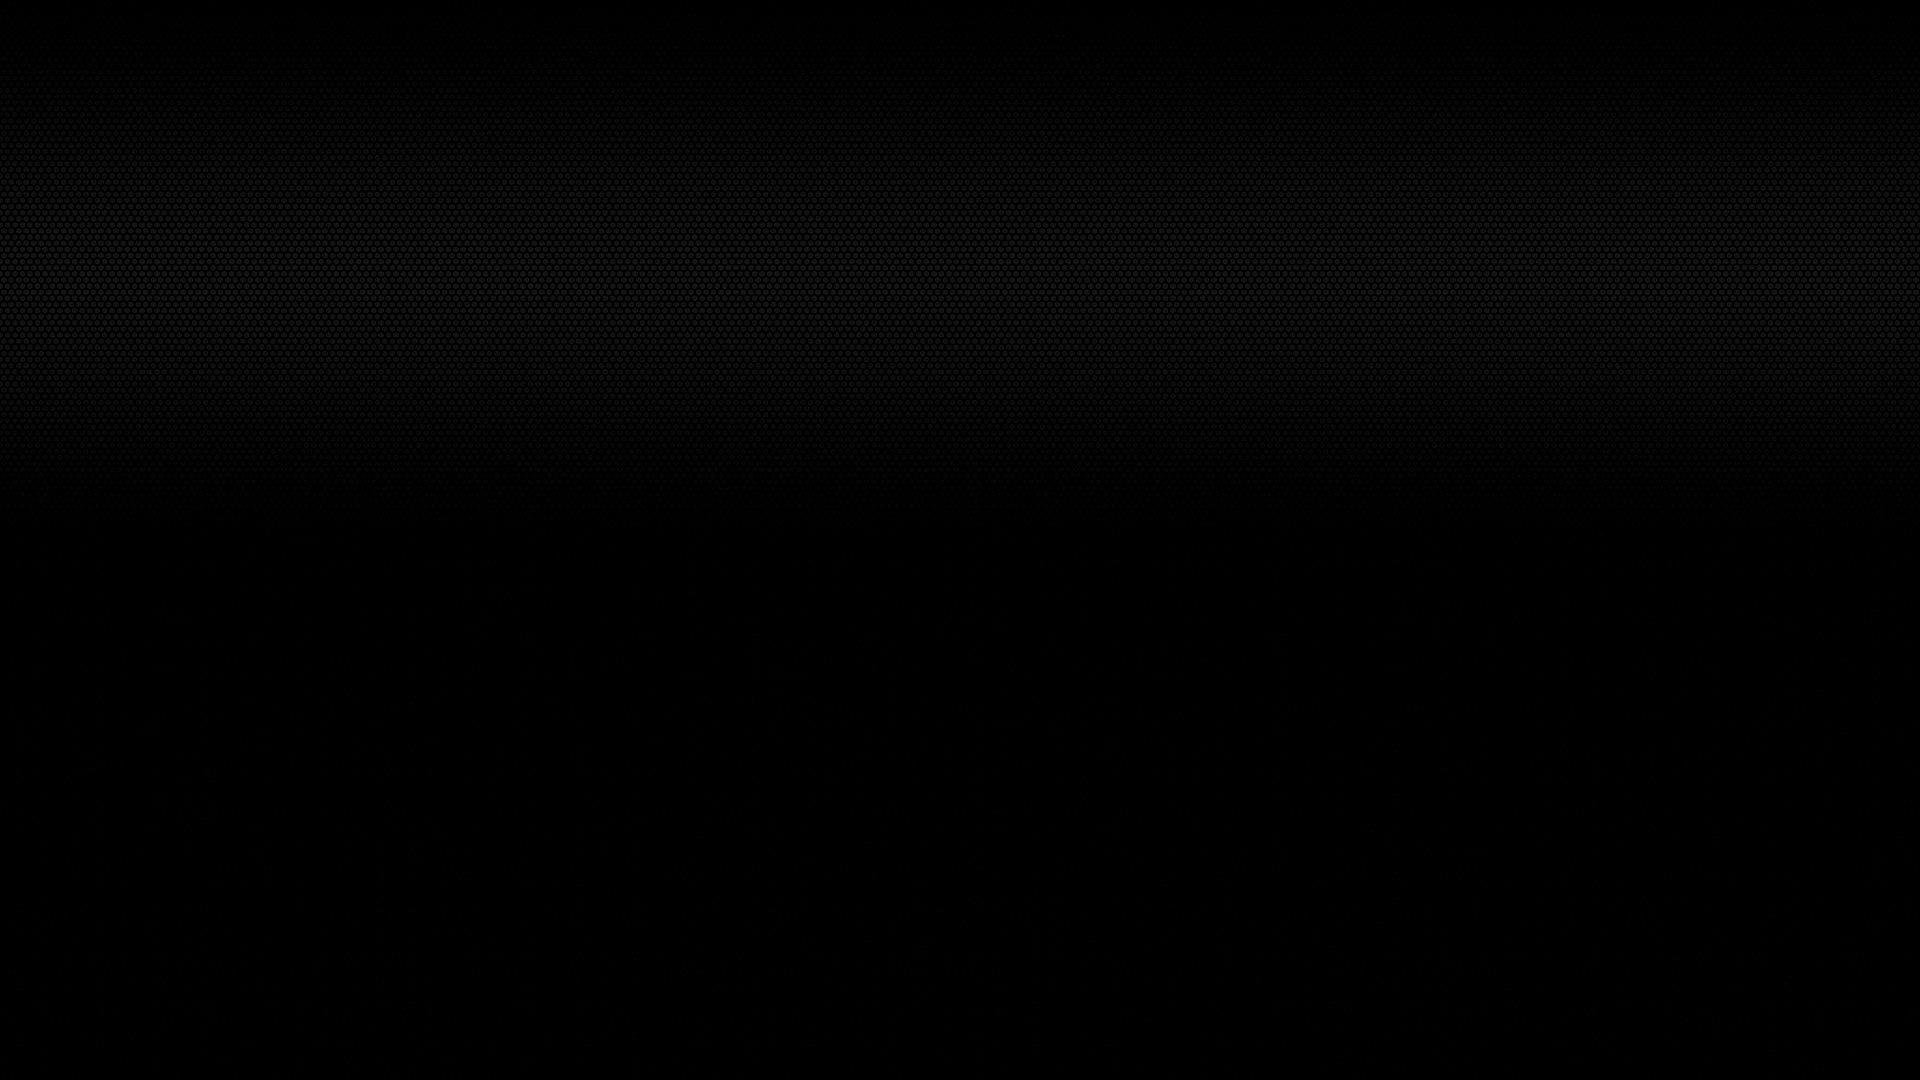 Black Wallpaper HD Computer with high-resolution 1920x1080 pixel. You can use and set as wallpaper for Notebook Screensavers, Mac Wallpapers, Mobile Home Screen, iPhone or Android Phones Lock Screen